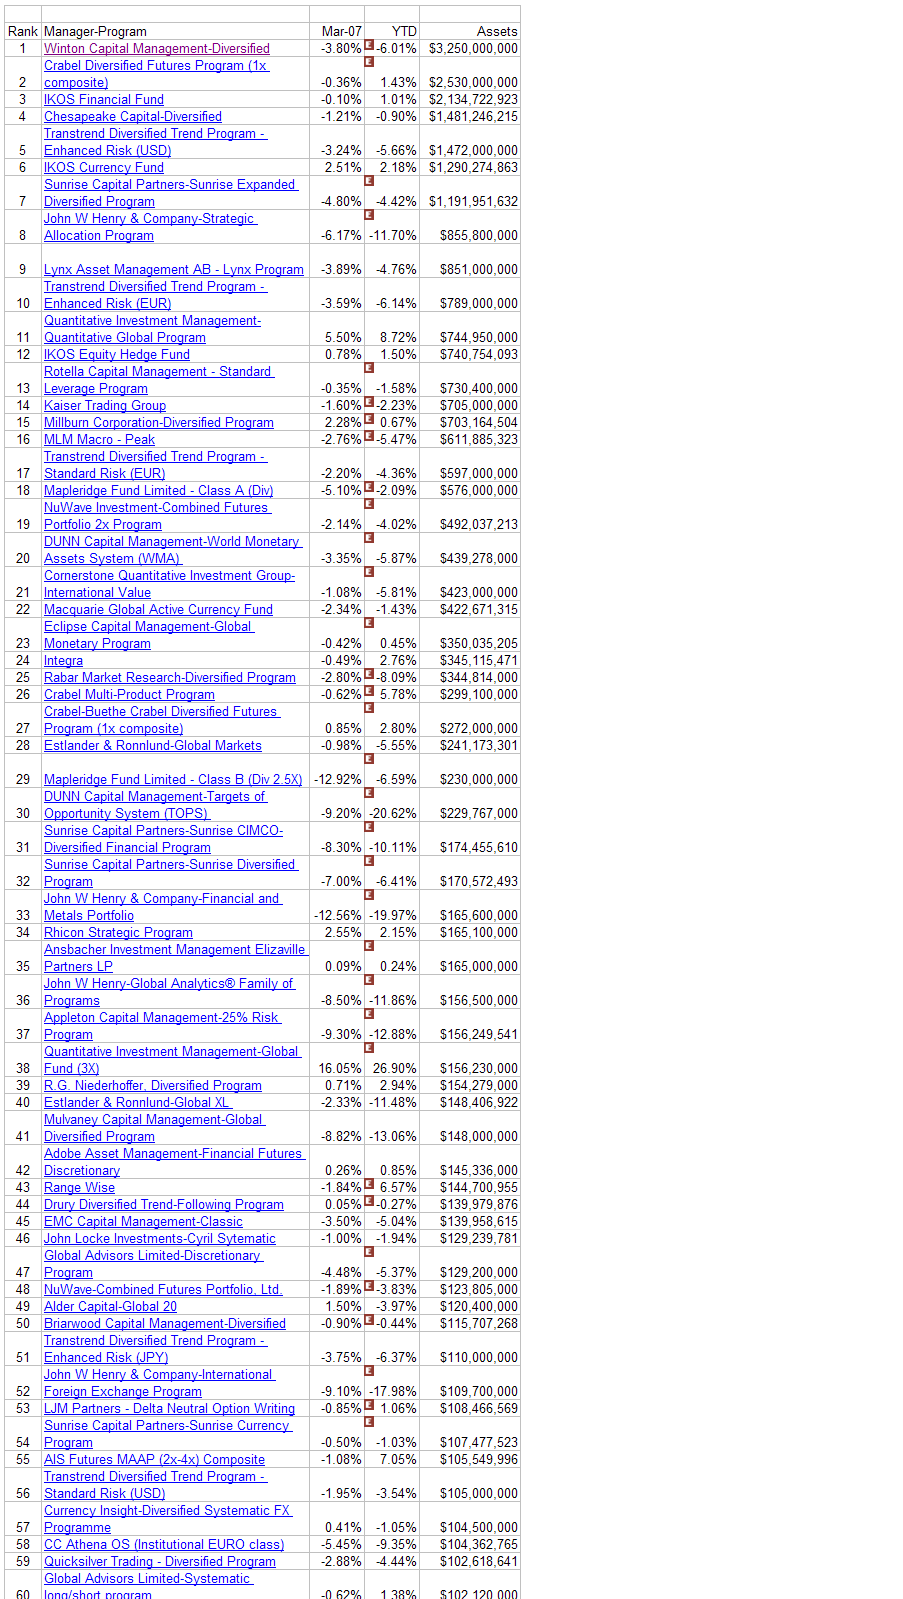 Funds 2007 above $100M sorted by Assets Under Mgmt.